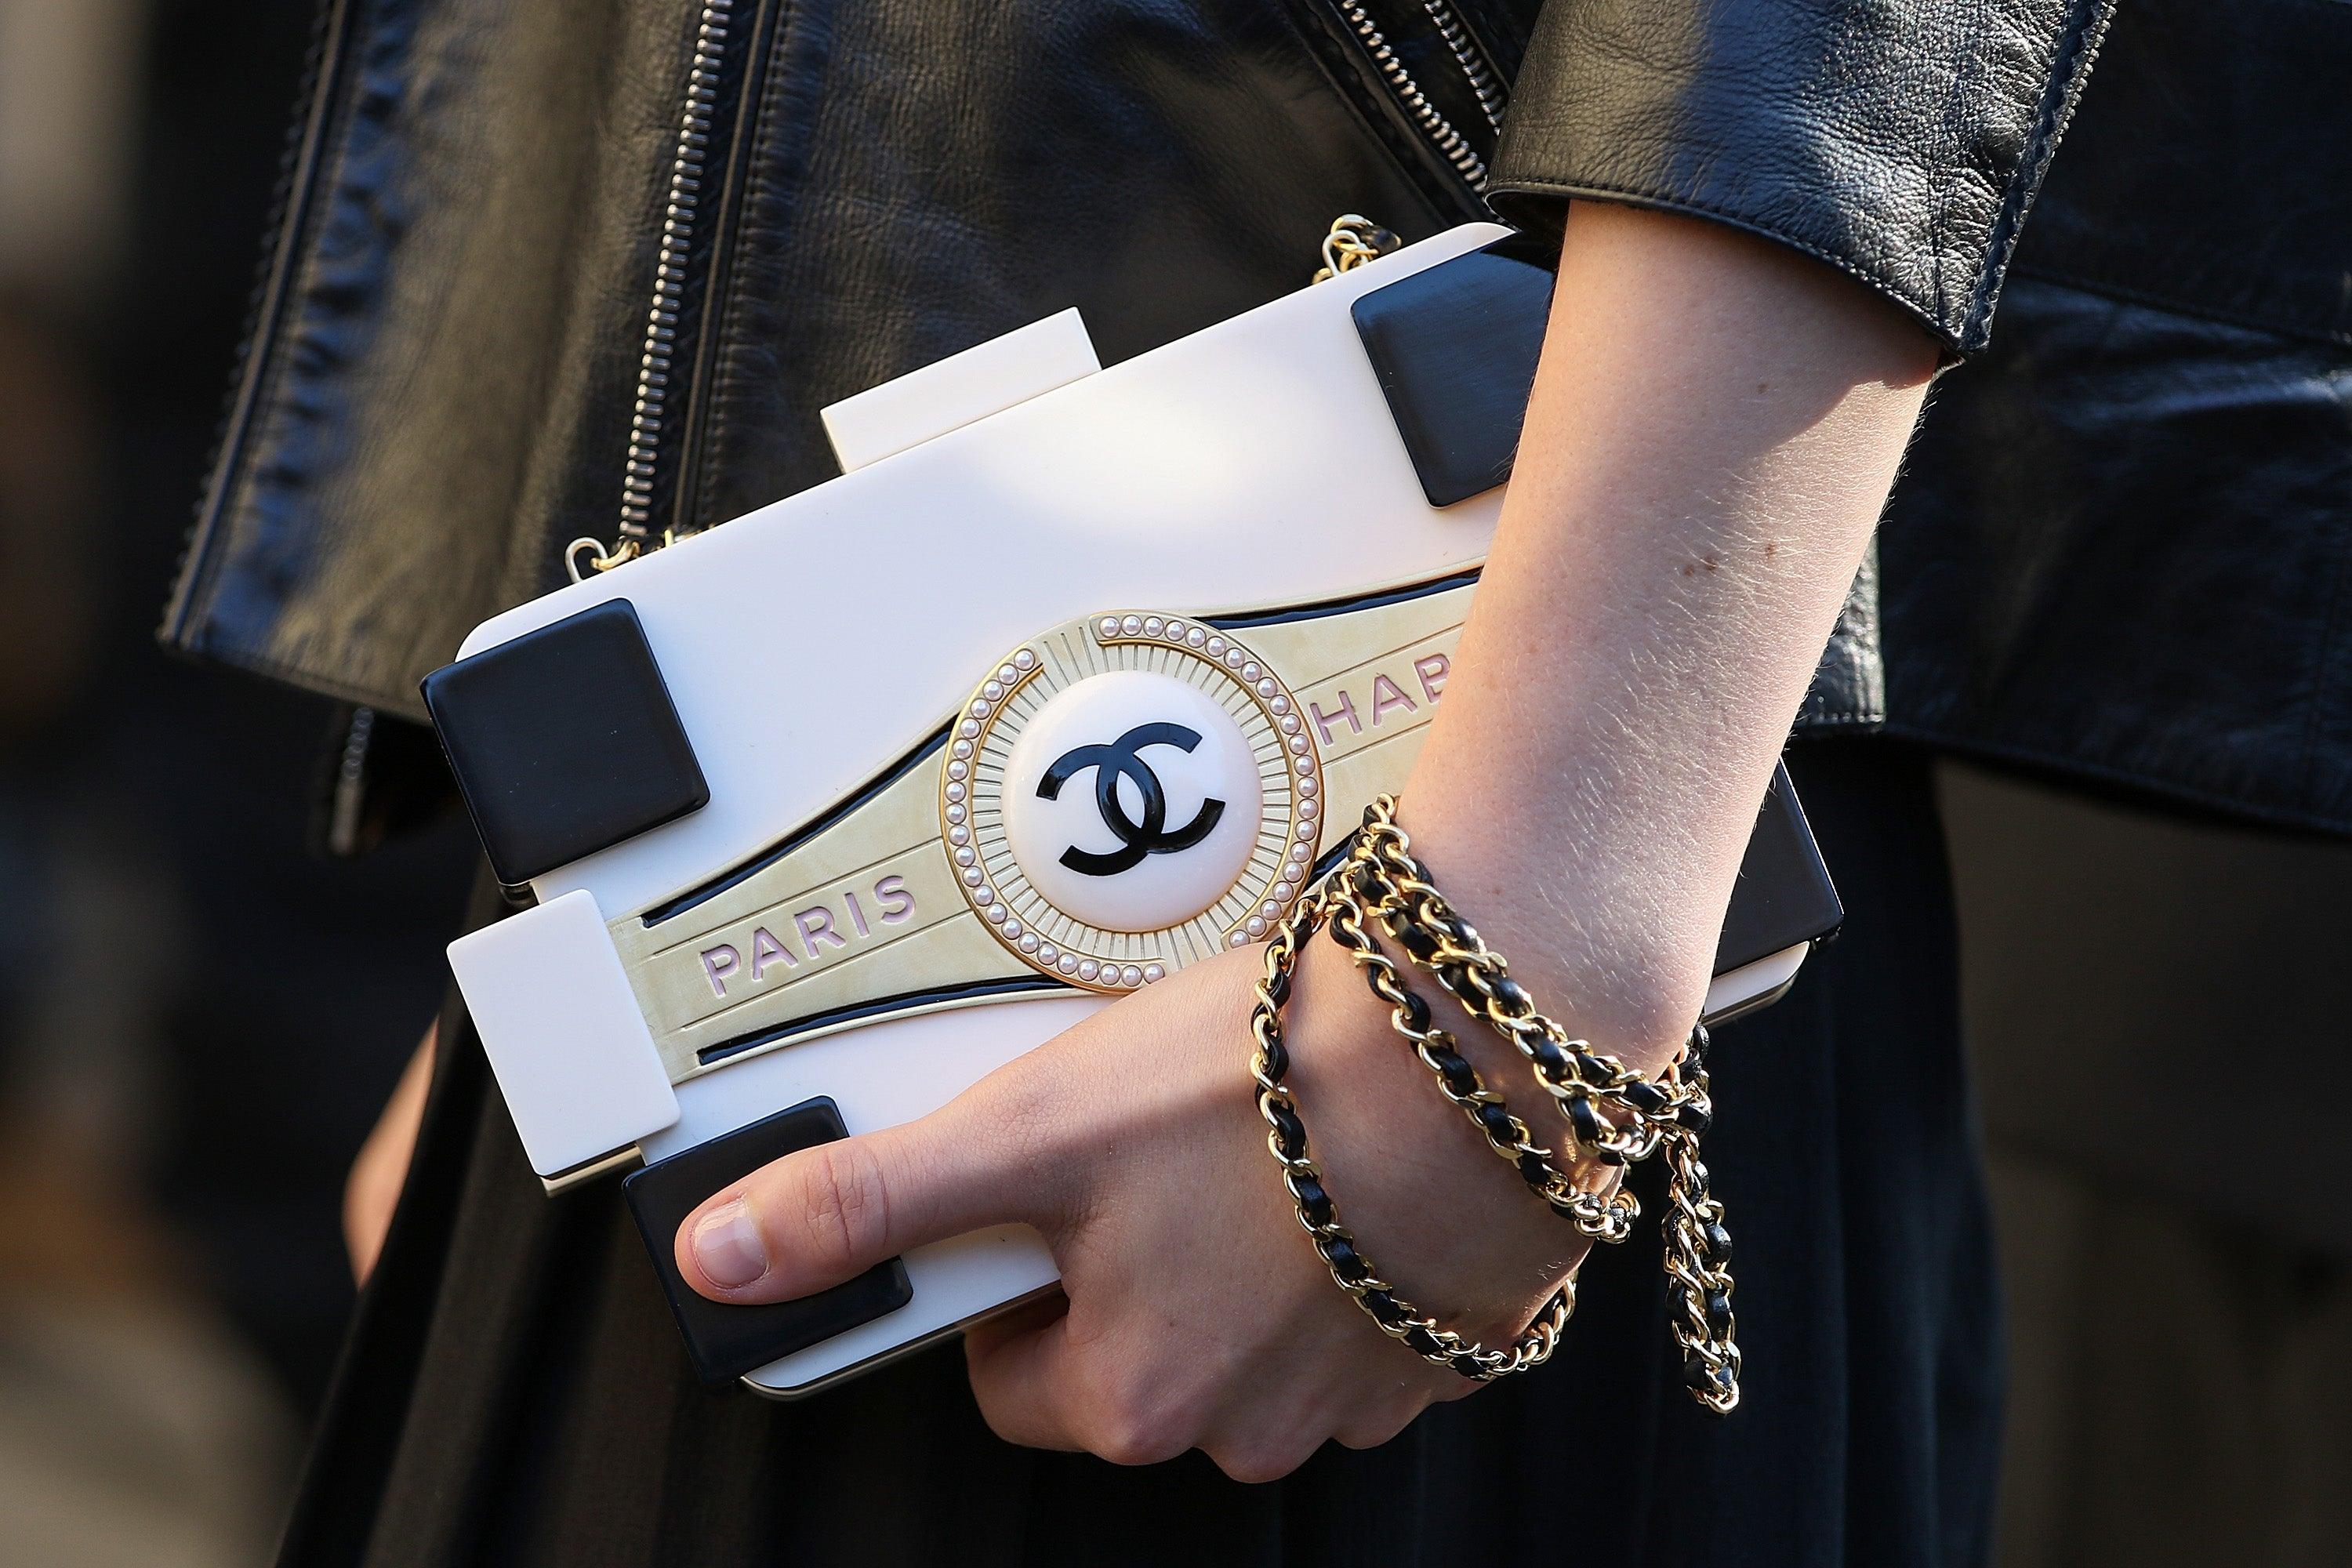 Chanel Iridescent Caviar Leather Vintage Mademoiselle Clutch with Chai –  LuxeDH